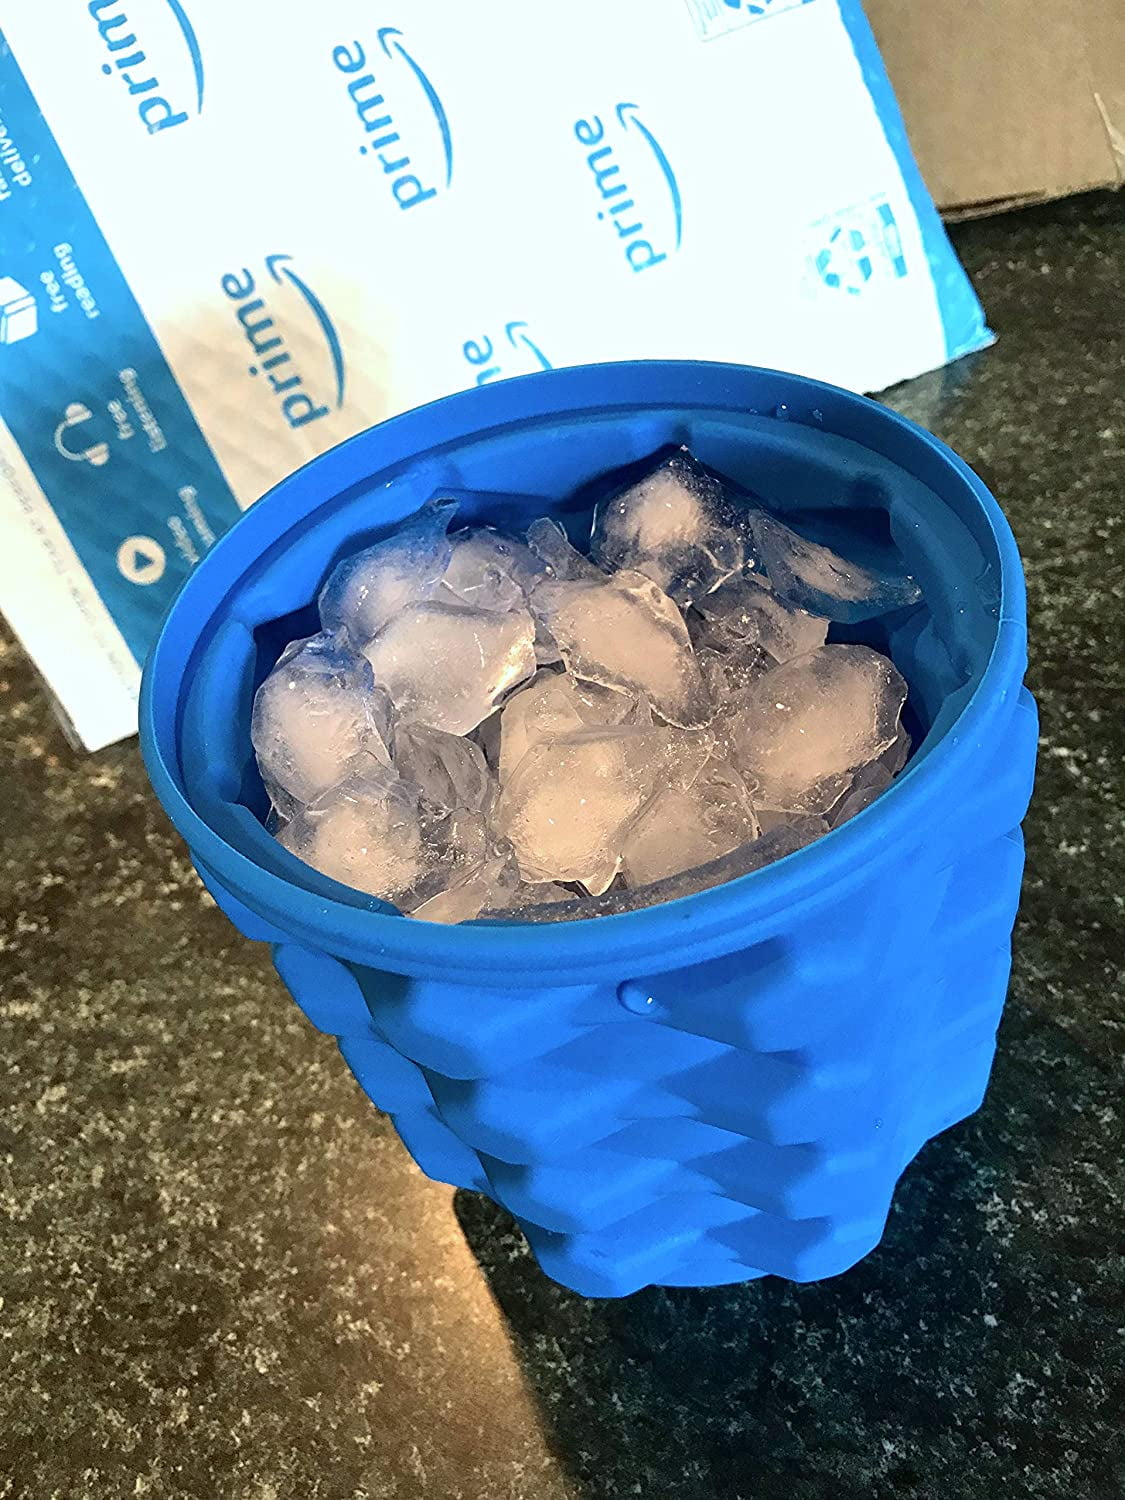 .com: New Ice Cube Maker Silicone Bucket Mold Cooler With Lid  Indoors/Outdoors Use Makes Small Nugget Ice Chips for Soft Drinks Beverage  Wine Beer Whiskey Cocktail Safe Healthy BPA Free Ice Tray